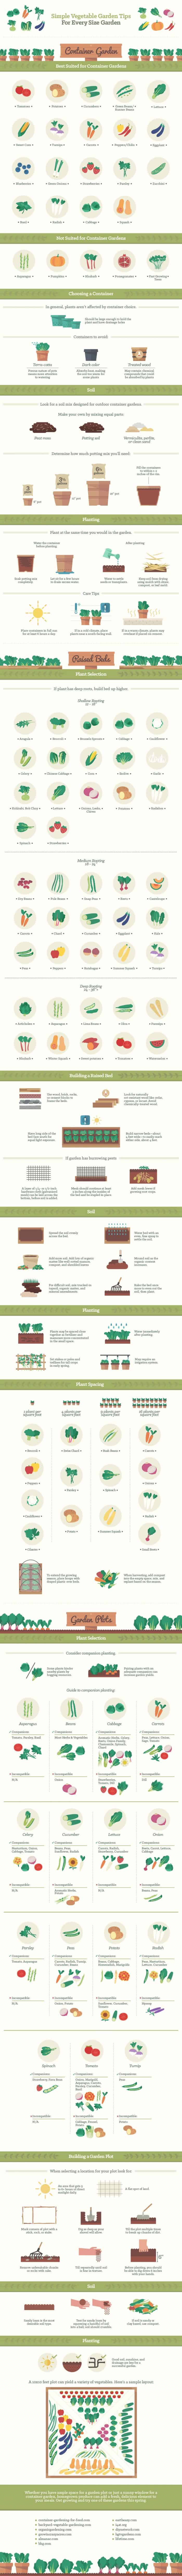 tips on how to grow different kinds of vegetables in gardens